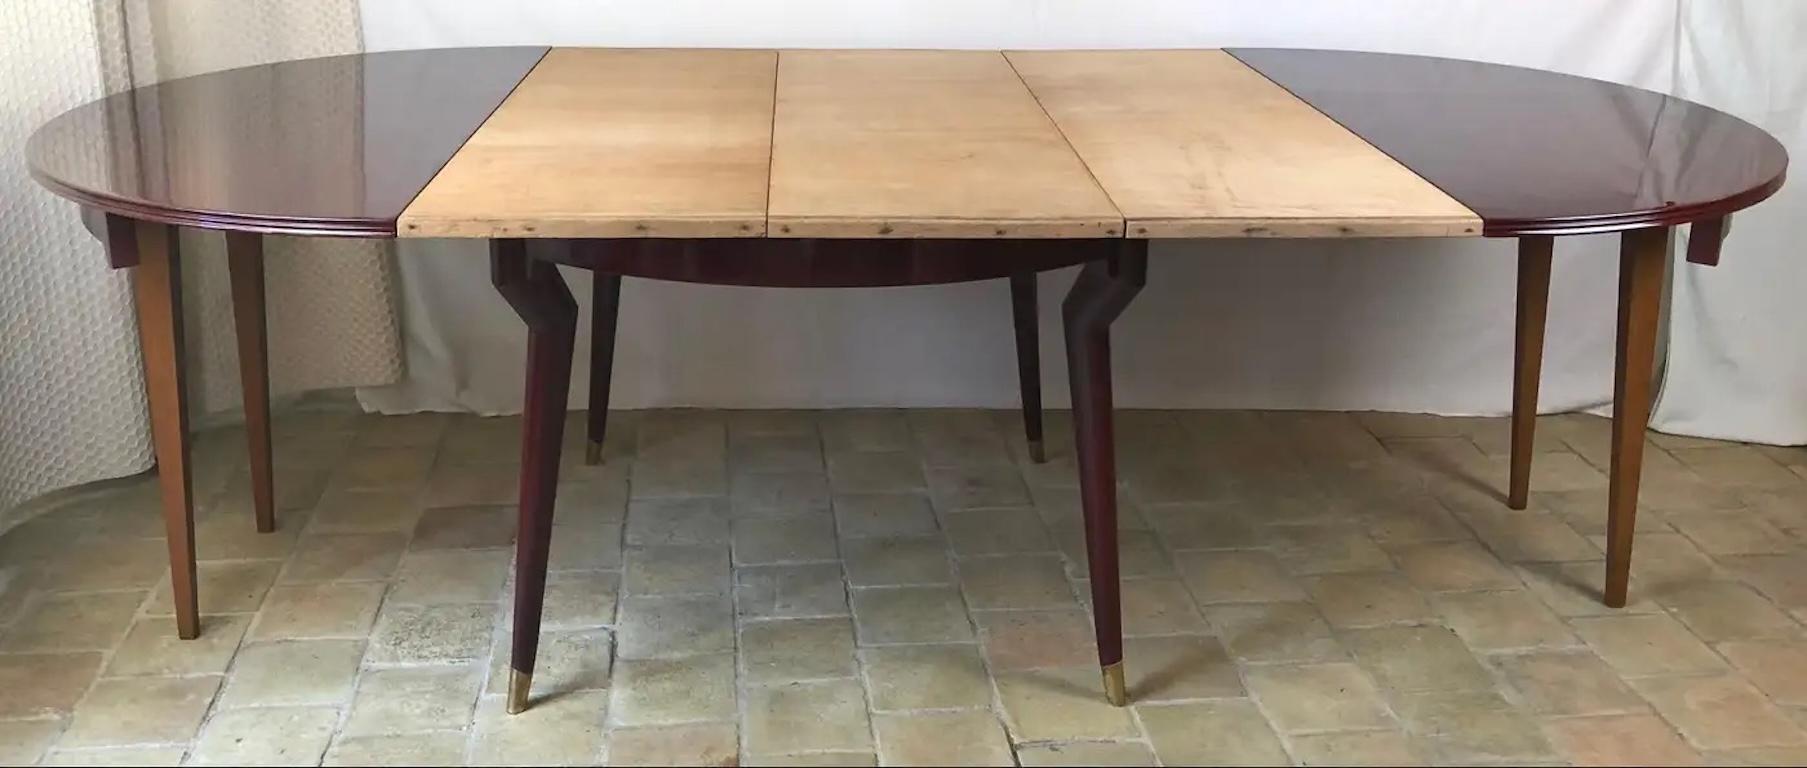 Mid-Century Modern Extendable Italian Dining Table attributed to Gio Ponti For Sale